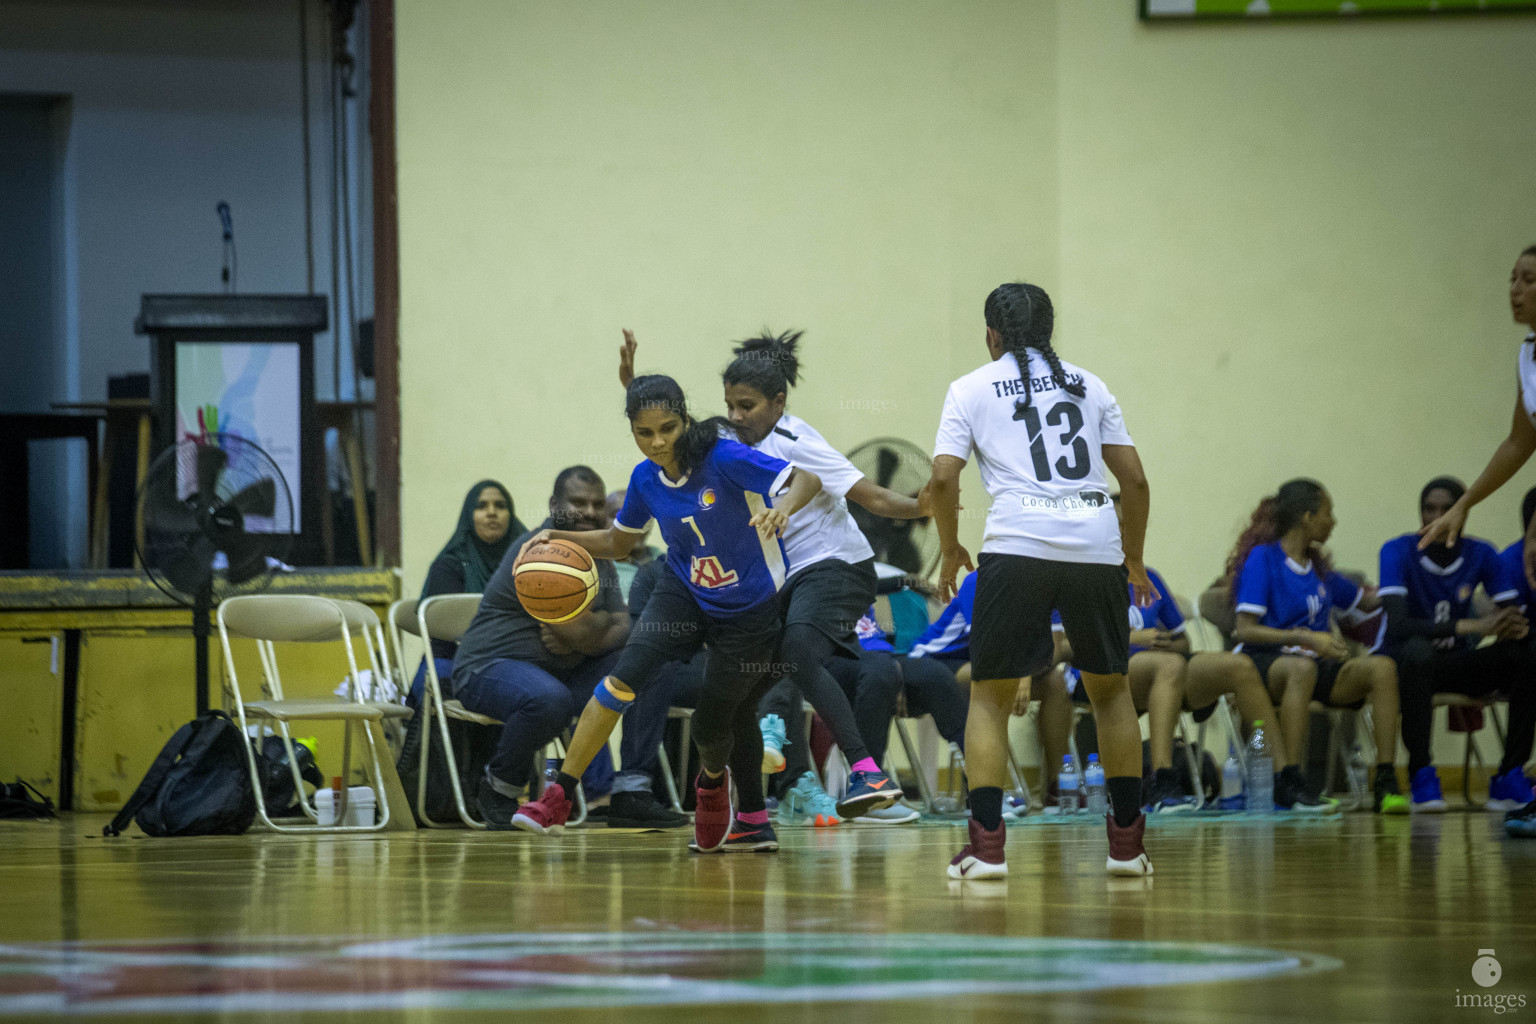 Cyclone BS vs The Bench in 13th National Basketball League 2018 (Women's Division), 10th December 2018, Monday Photos: Suadh Abdul Sattar / images.mv